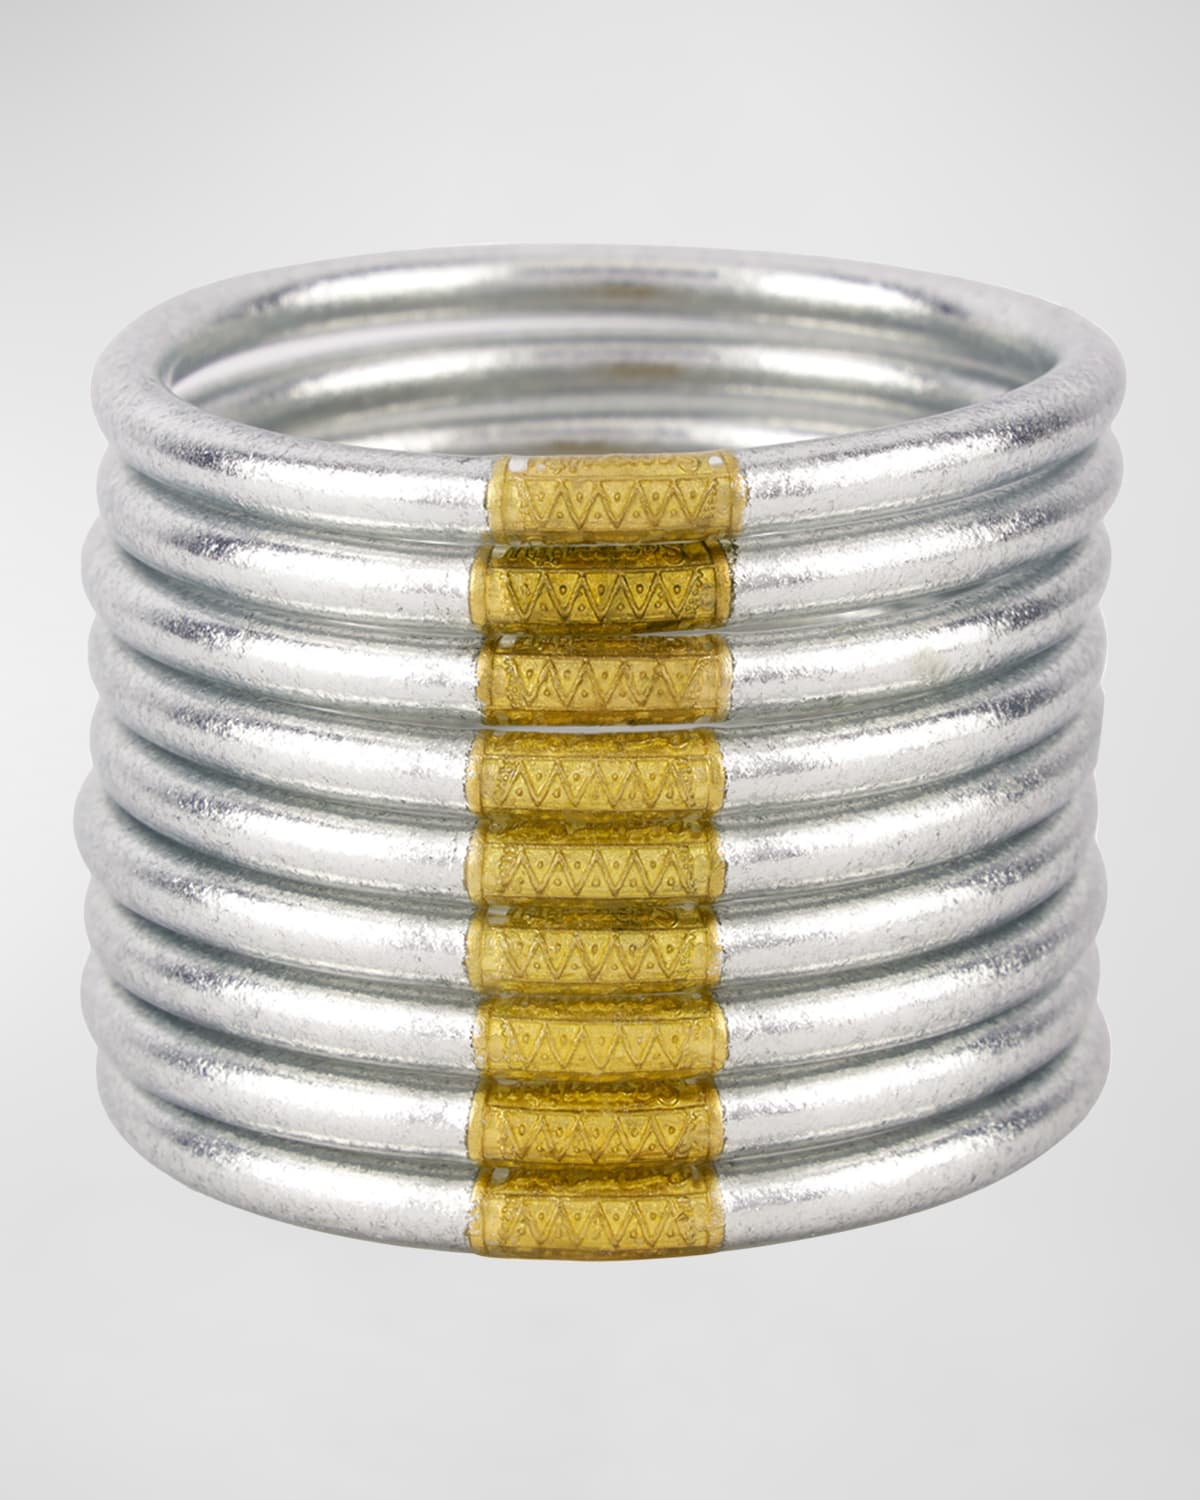 Gold All-Weather Bangles, Size S-L, Set of 9